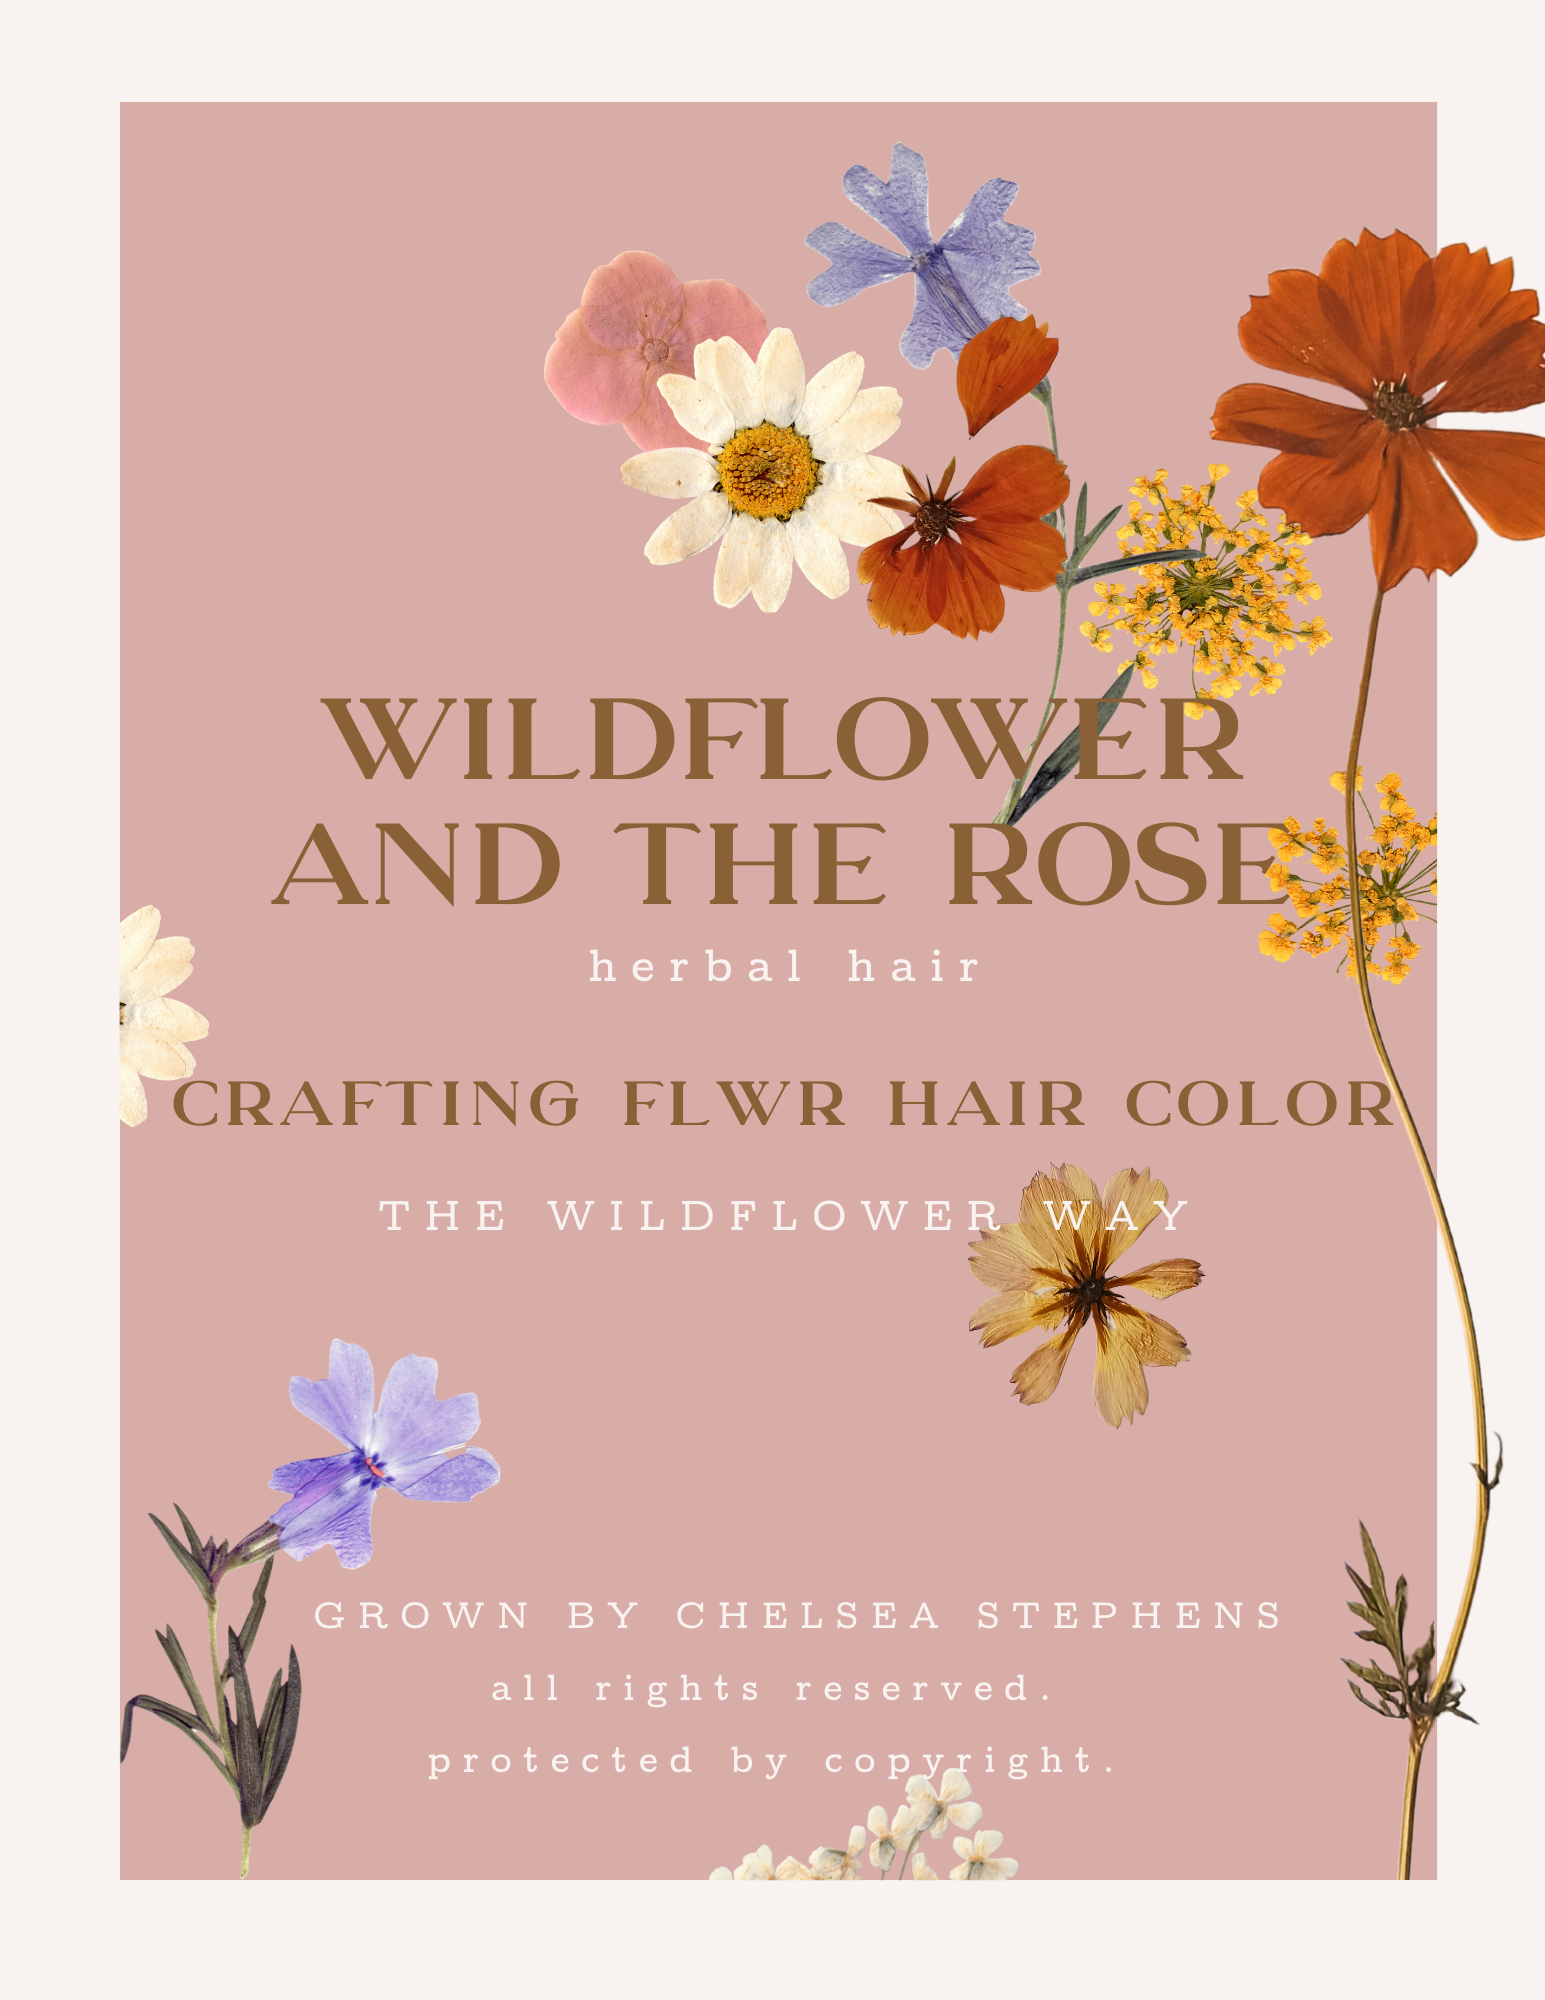 Crafting Wildflower and The Rose FLWR Hair Color